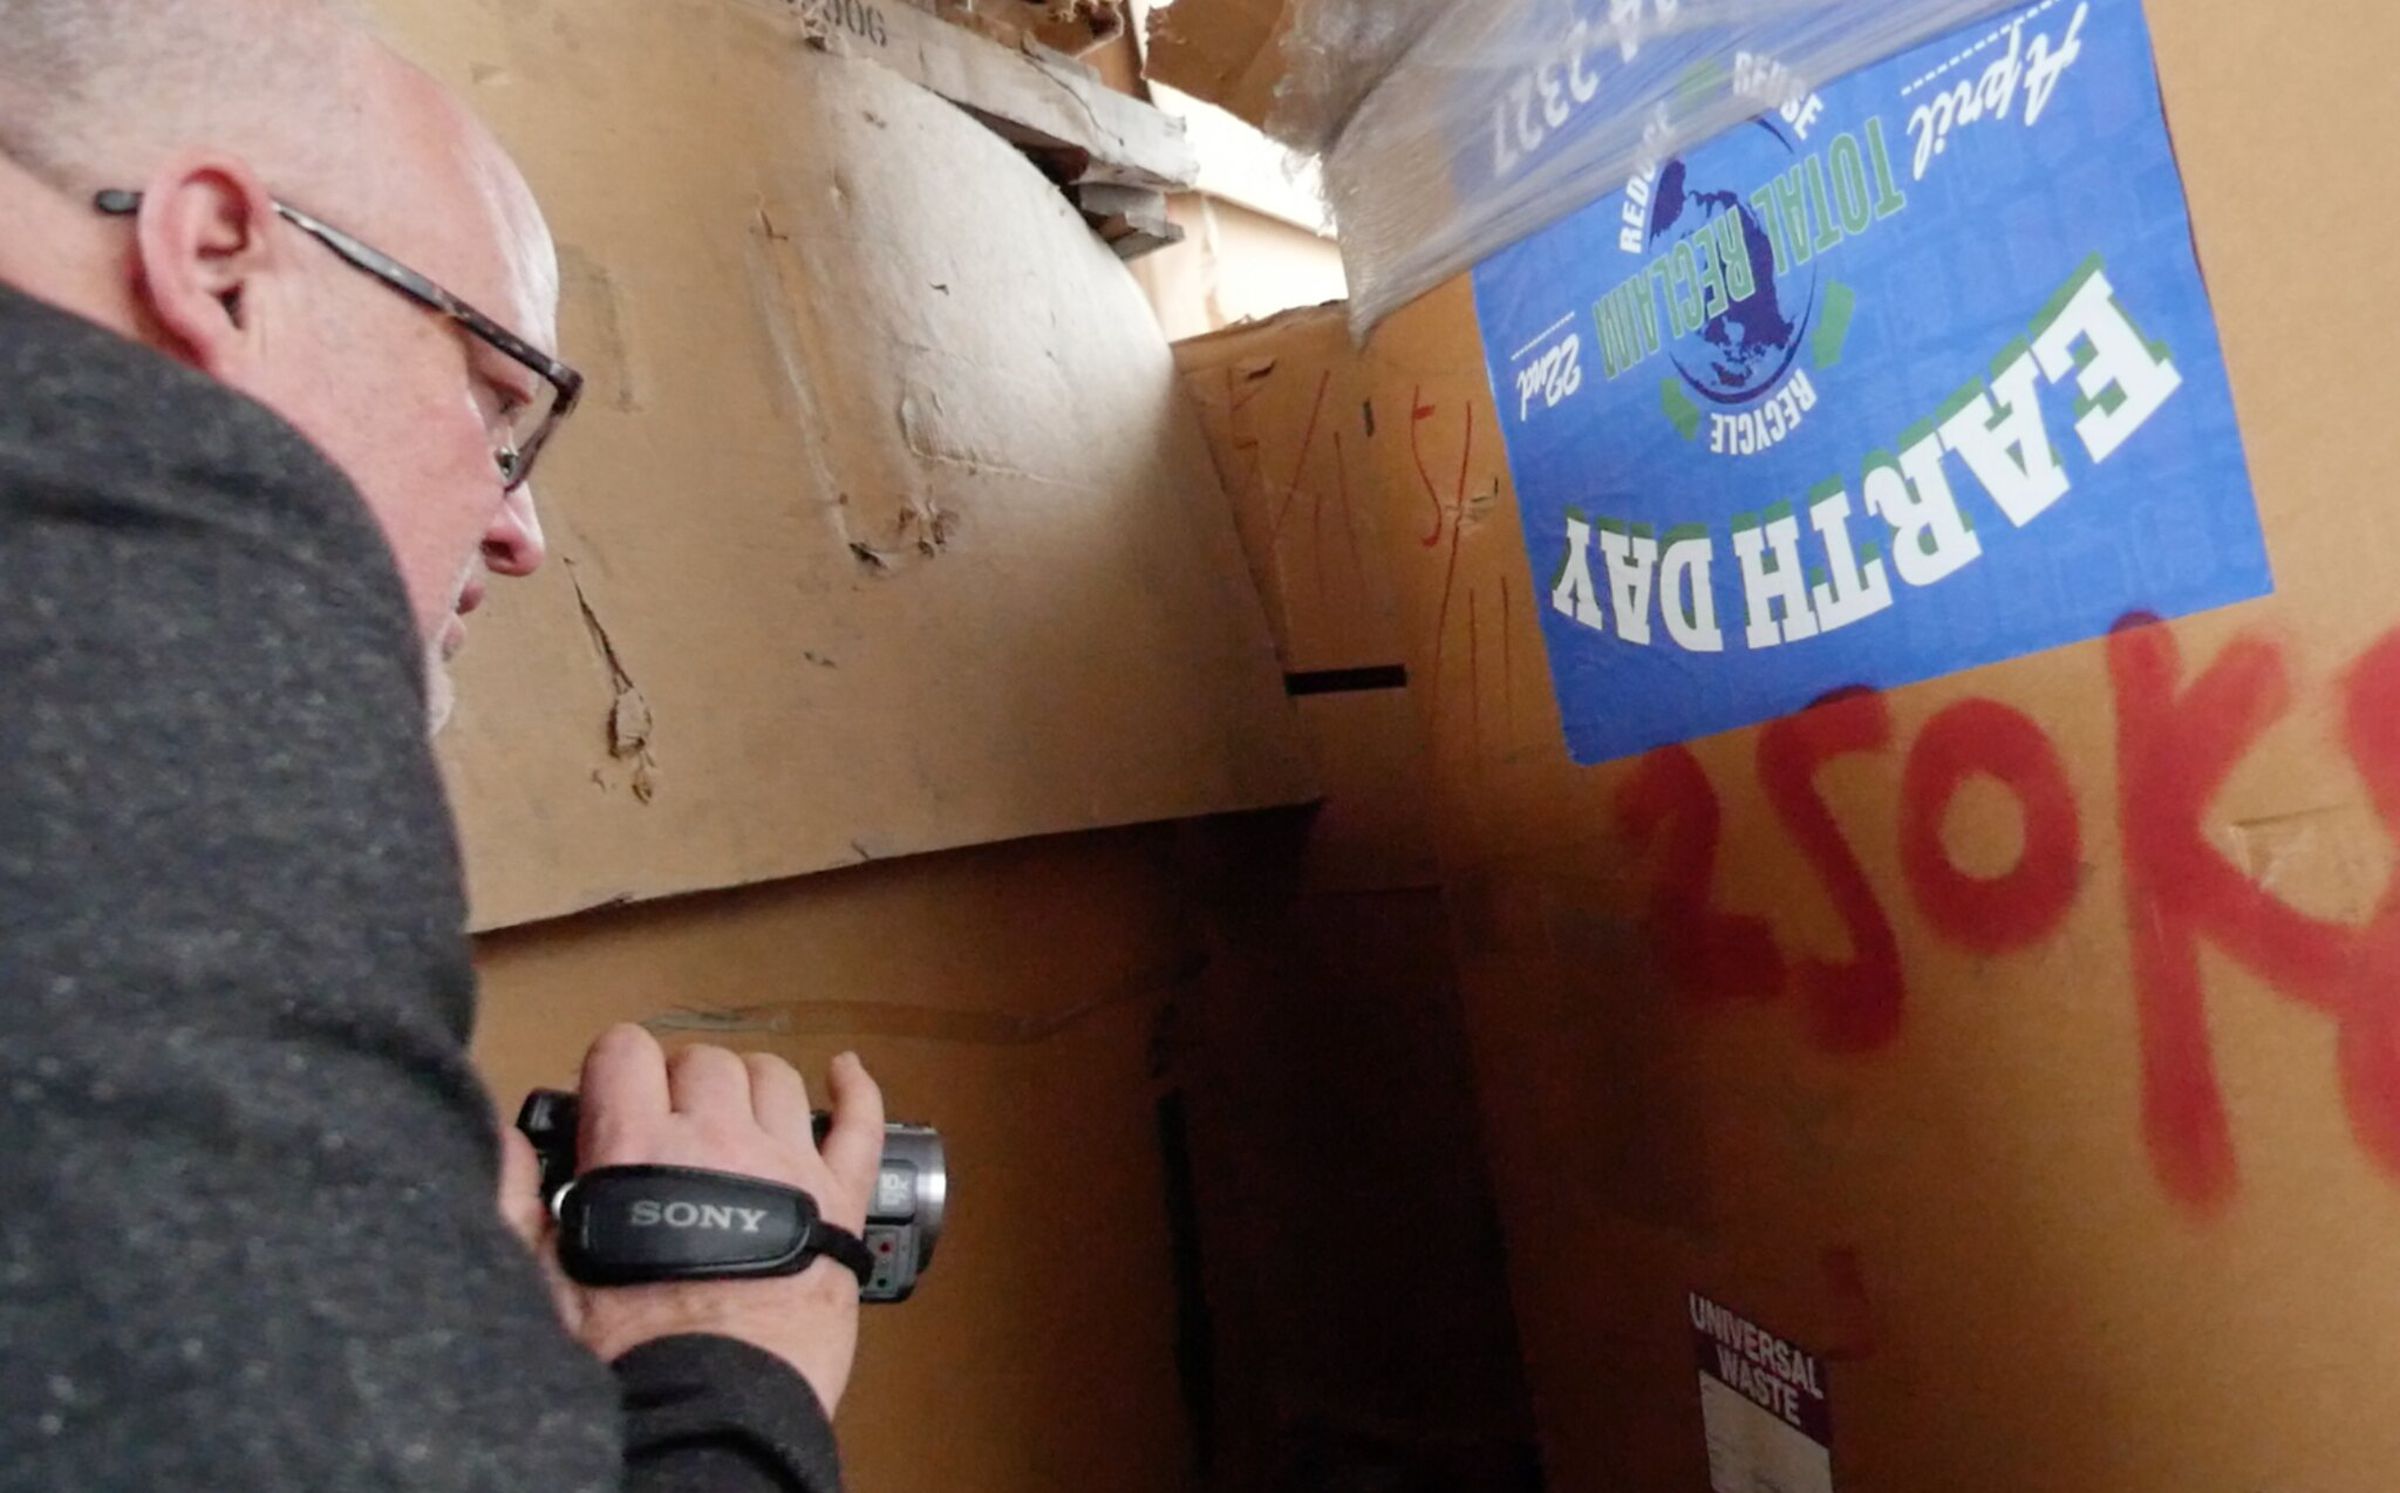 Jim Puckett discovers boxes bearing Seattle-based recycler Total Reclaim’s logos in an e-waste dismantling facility in rural Hong Kong.